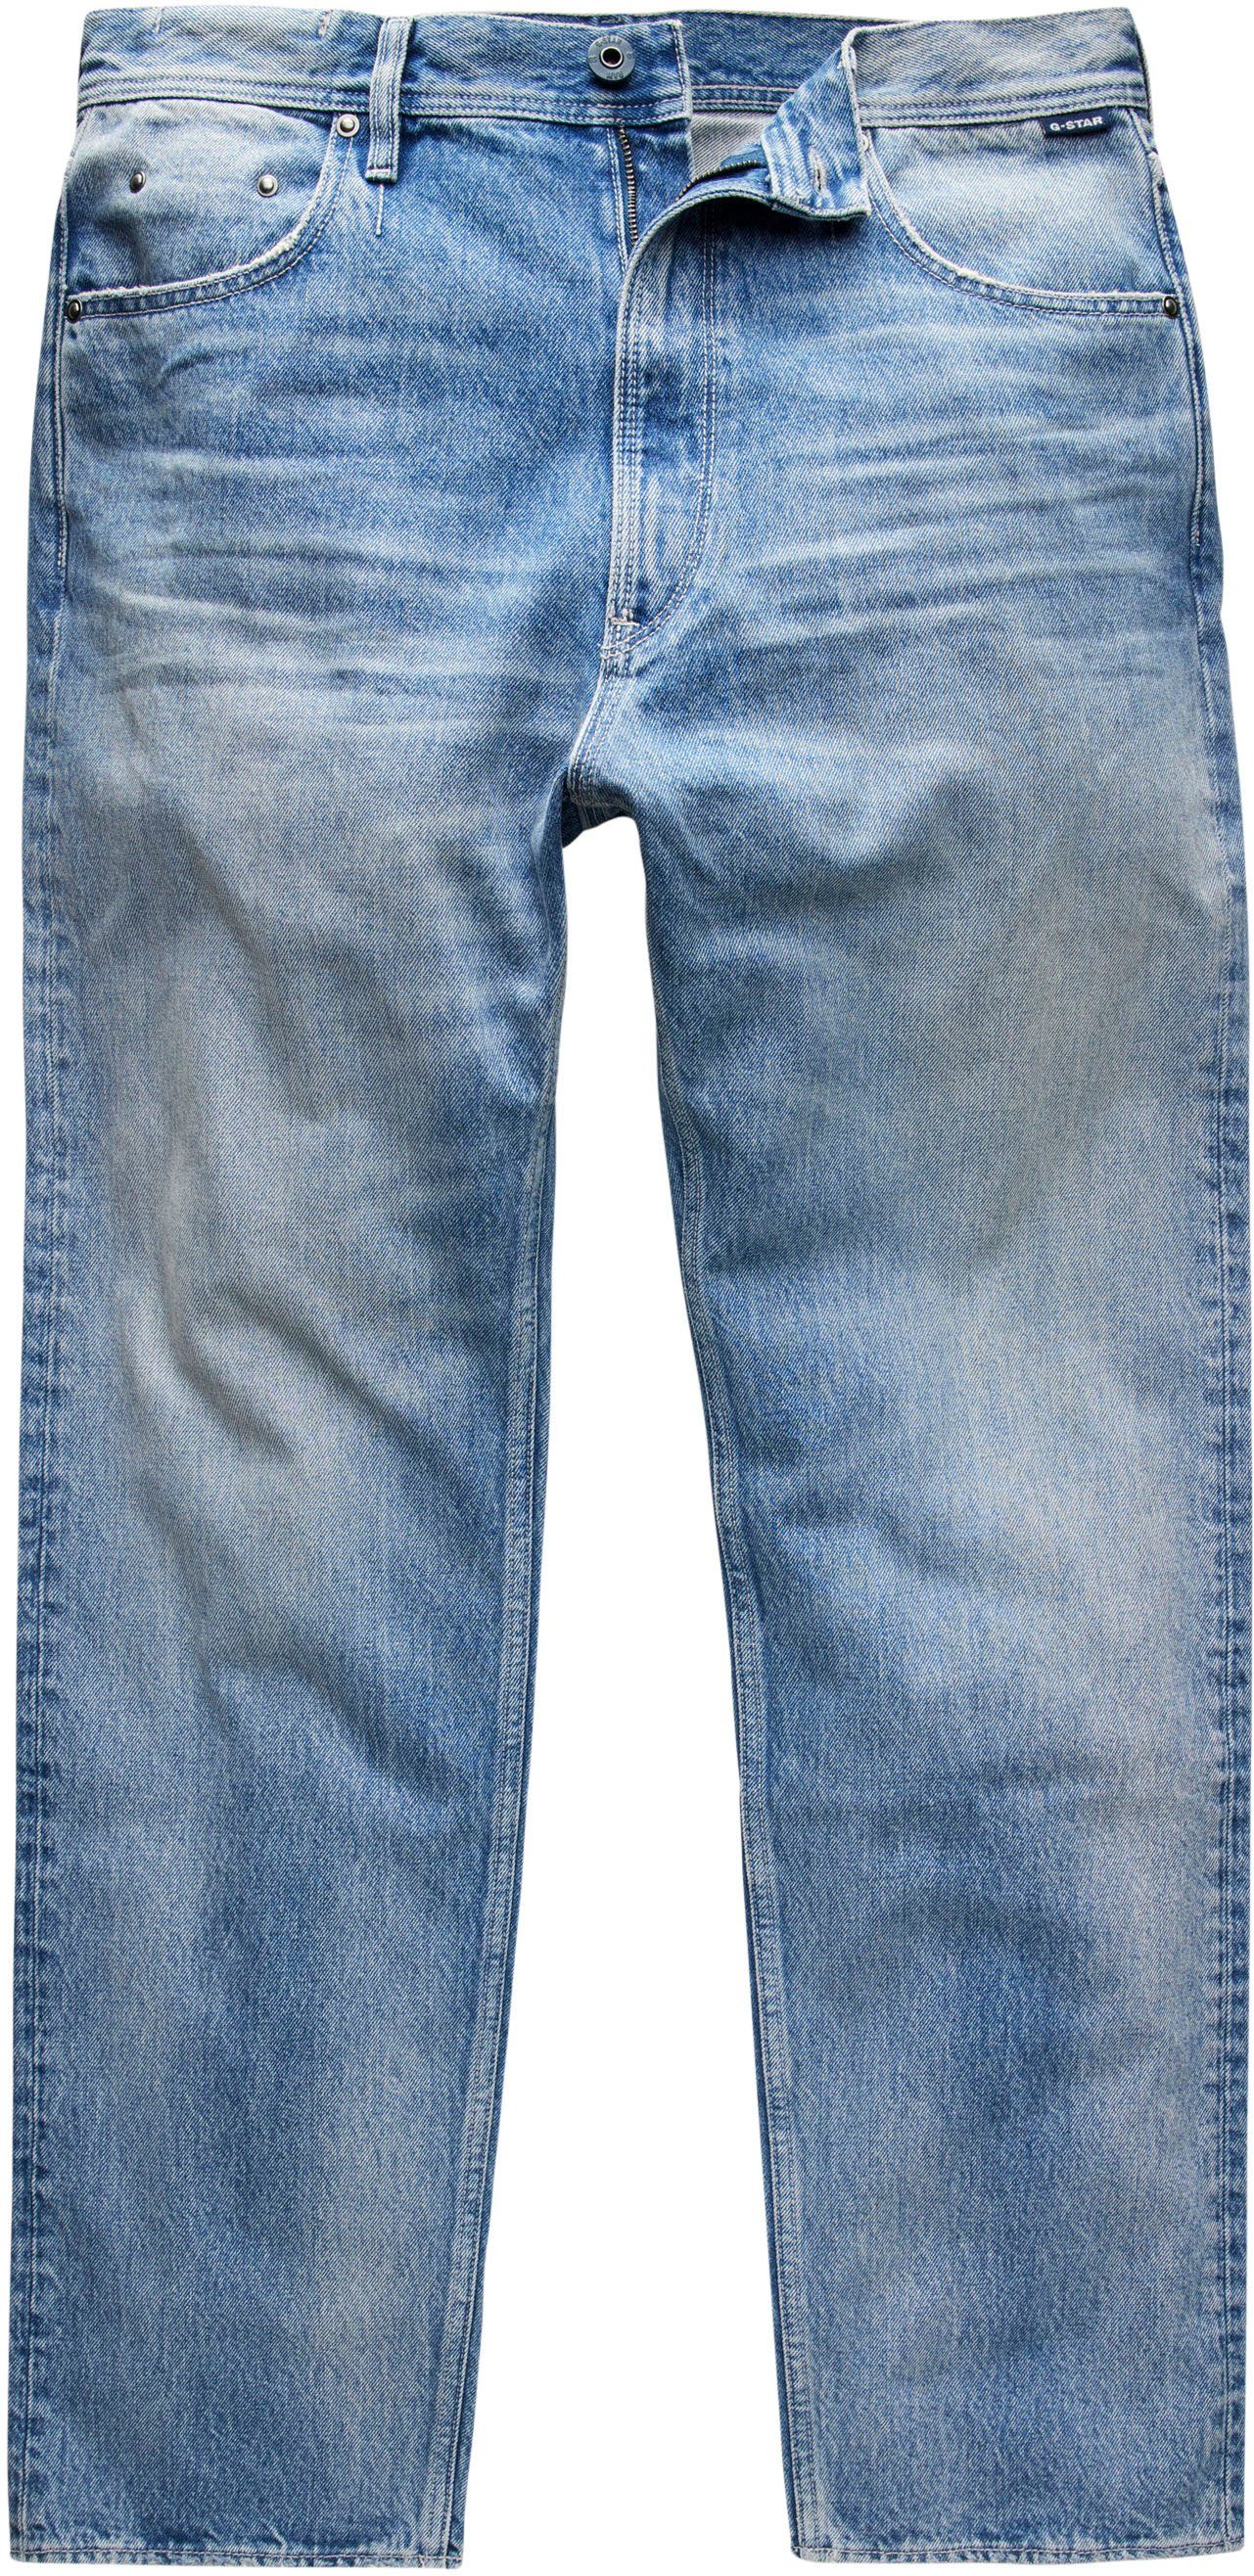 faded Type force Relax-fit-Jeans blue sun air 49 G-Star Relaxed RAW